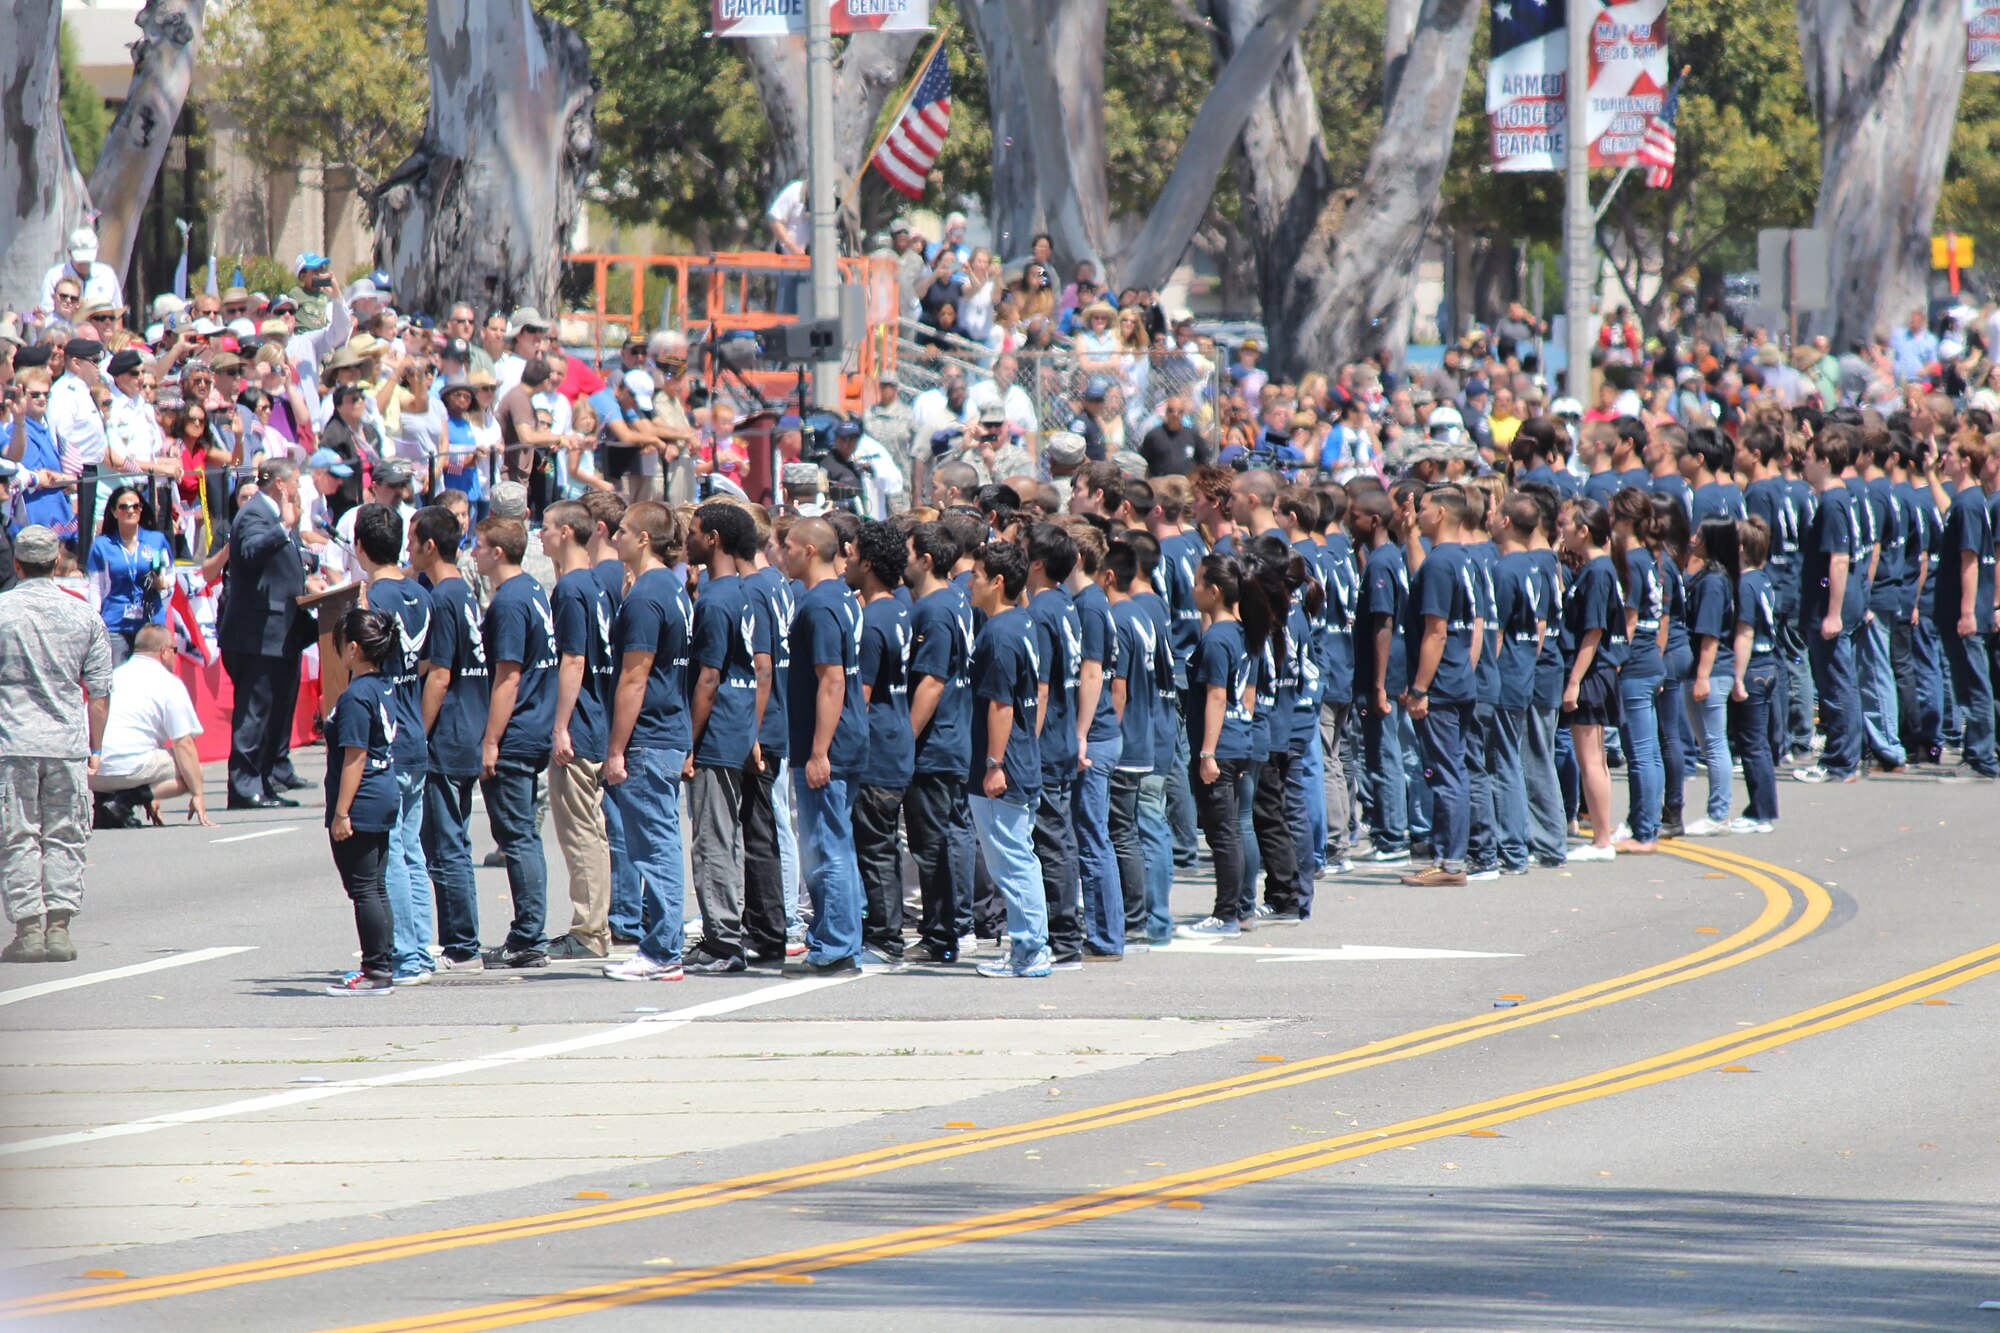 Secretary of the Air Force Michael Donley swears in new members of the U.S. Air Force May 19 during the Torrance Armed Forces Day Parade.  The SECAF served as the grand marshall of the parade and halted the marching to swear the young airman in. (U.S. Air Force photo by Melissa Buchanan)